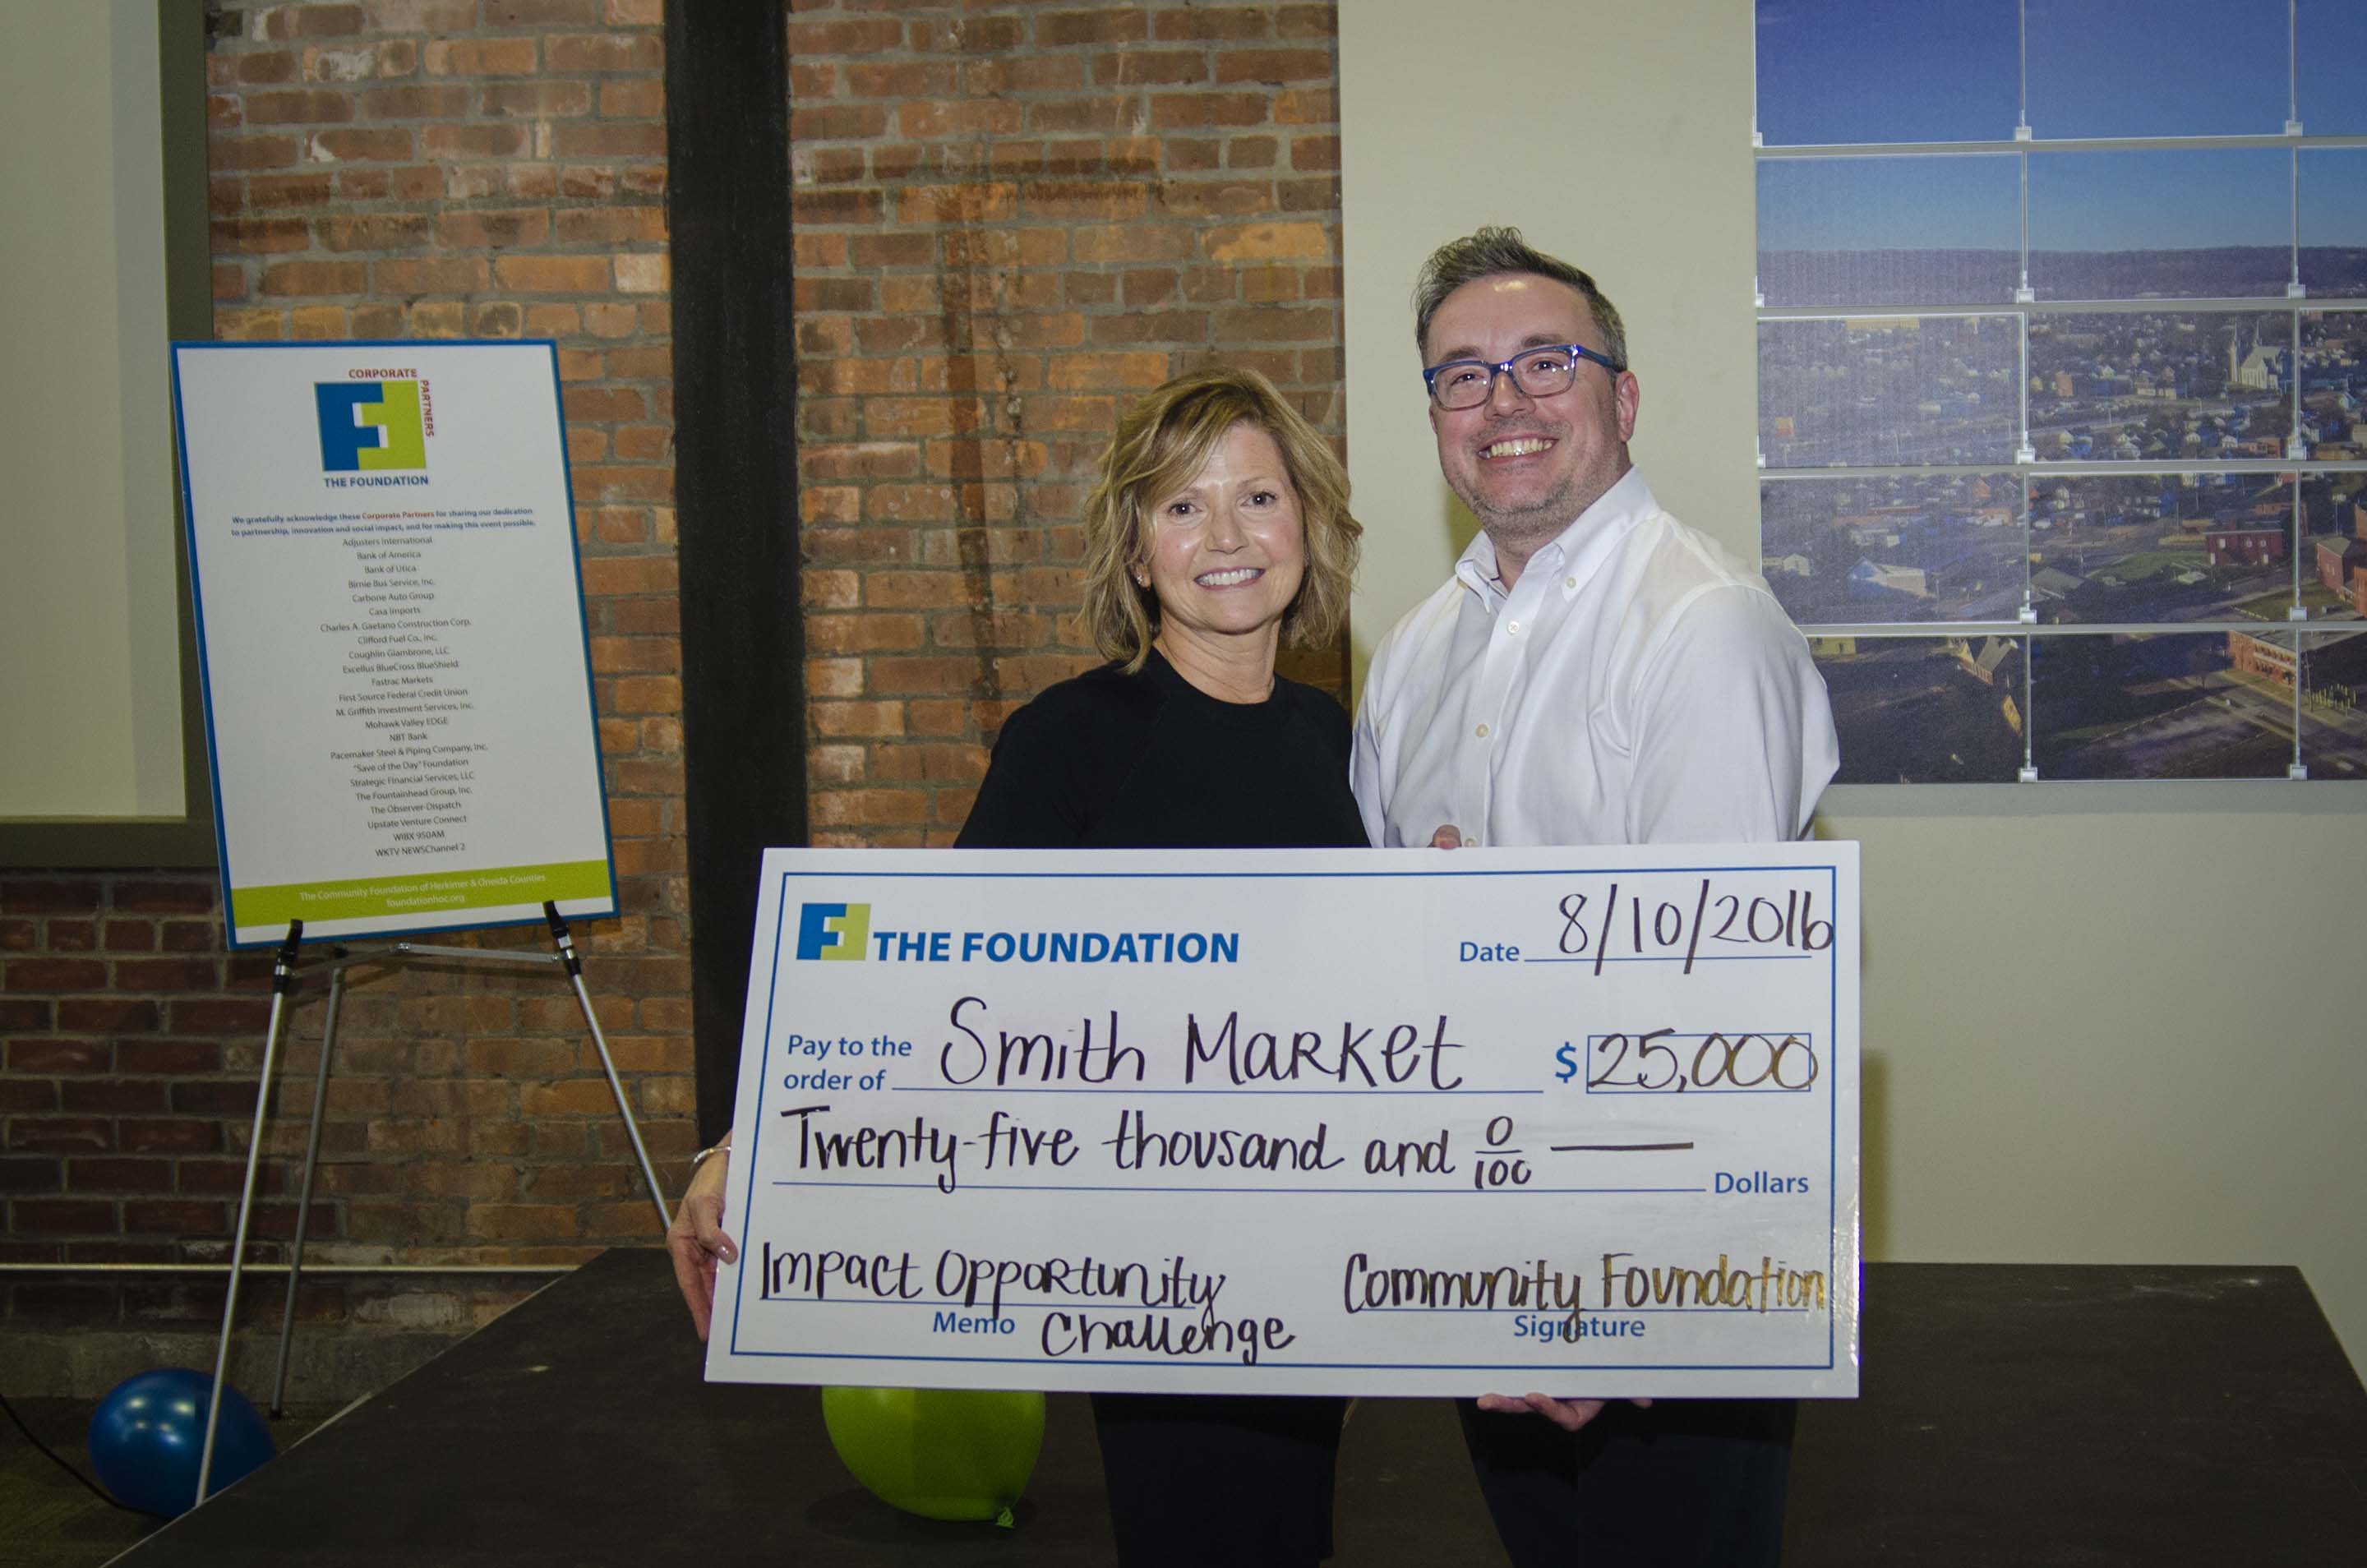 Smith Market Wins $25,000 Impact Opportunity Challenge